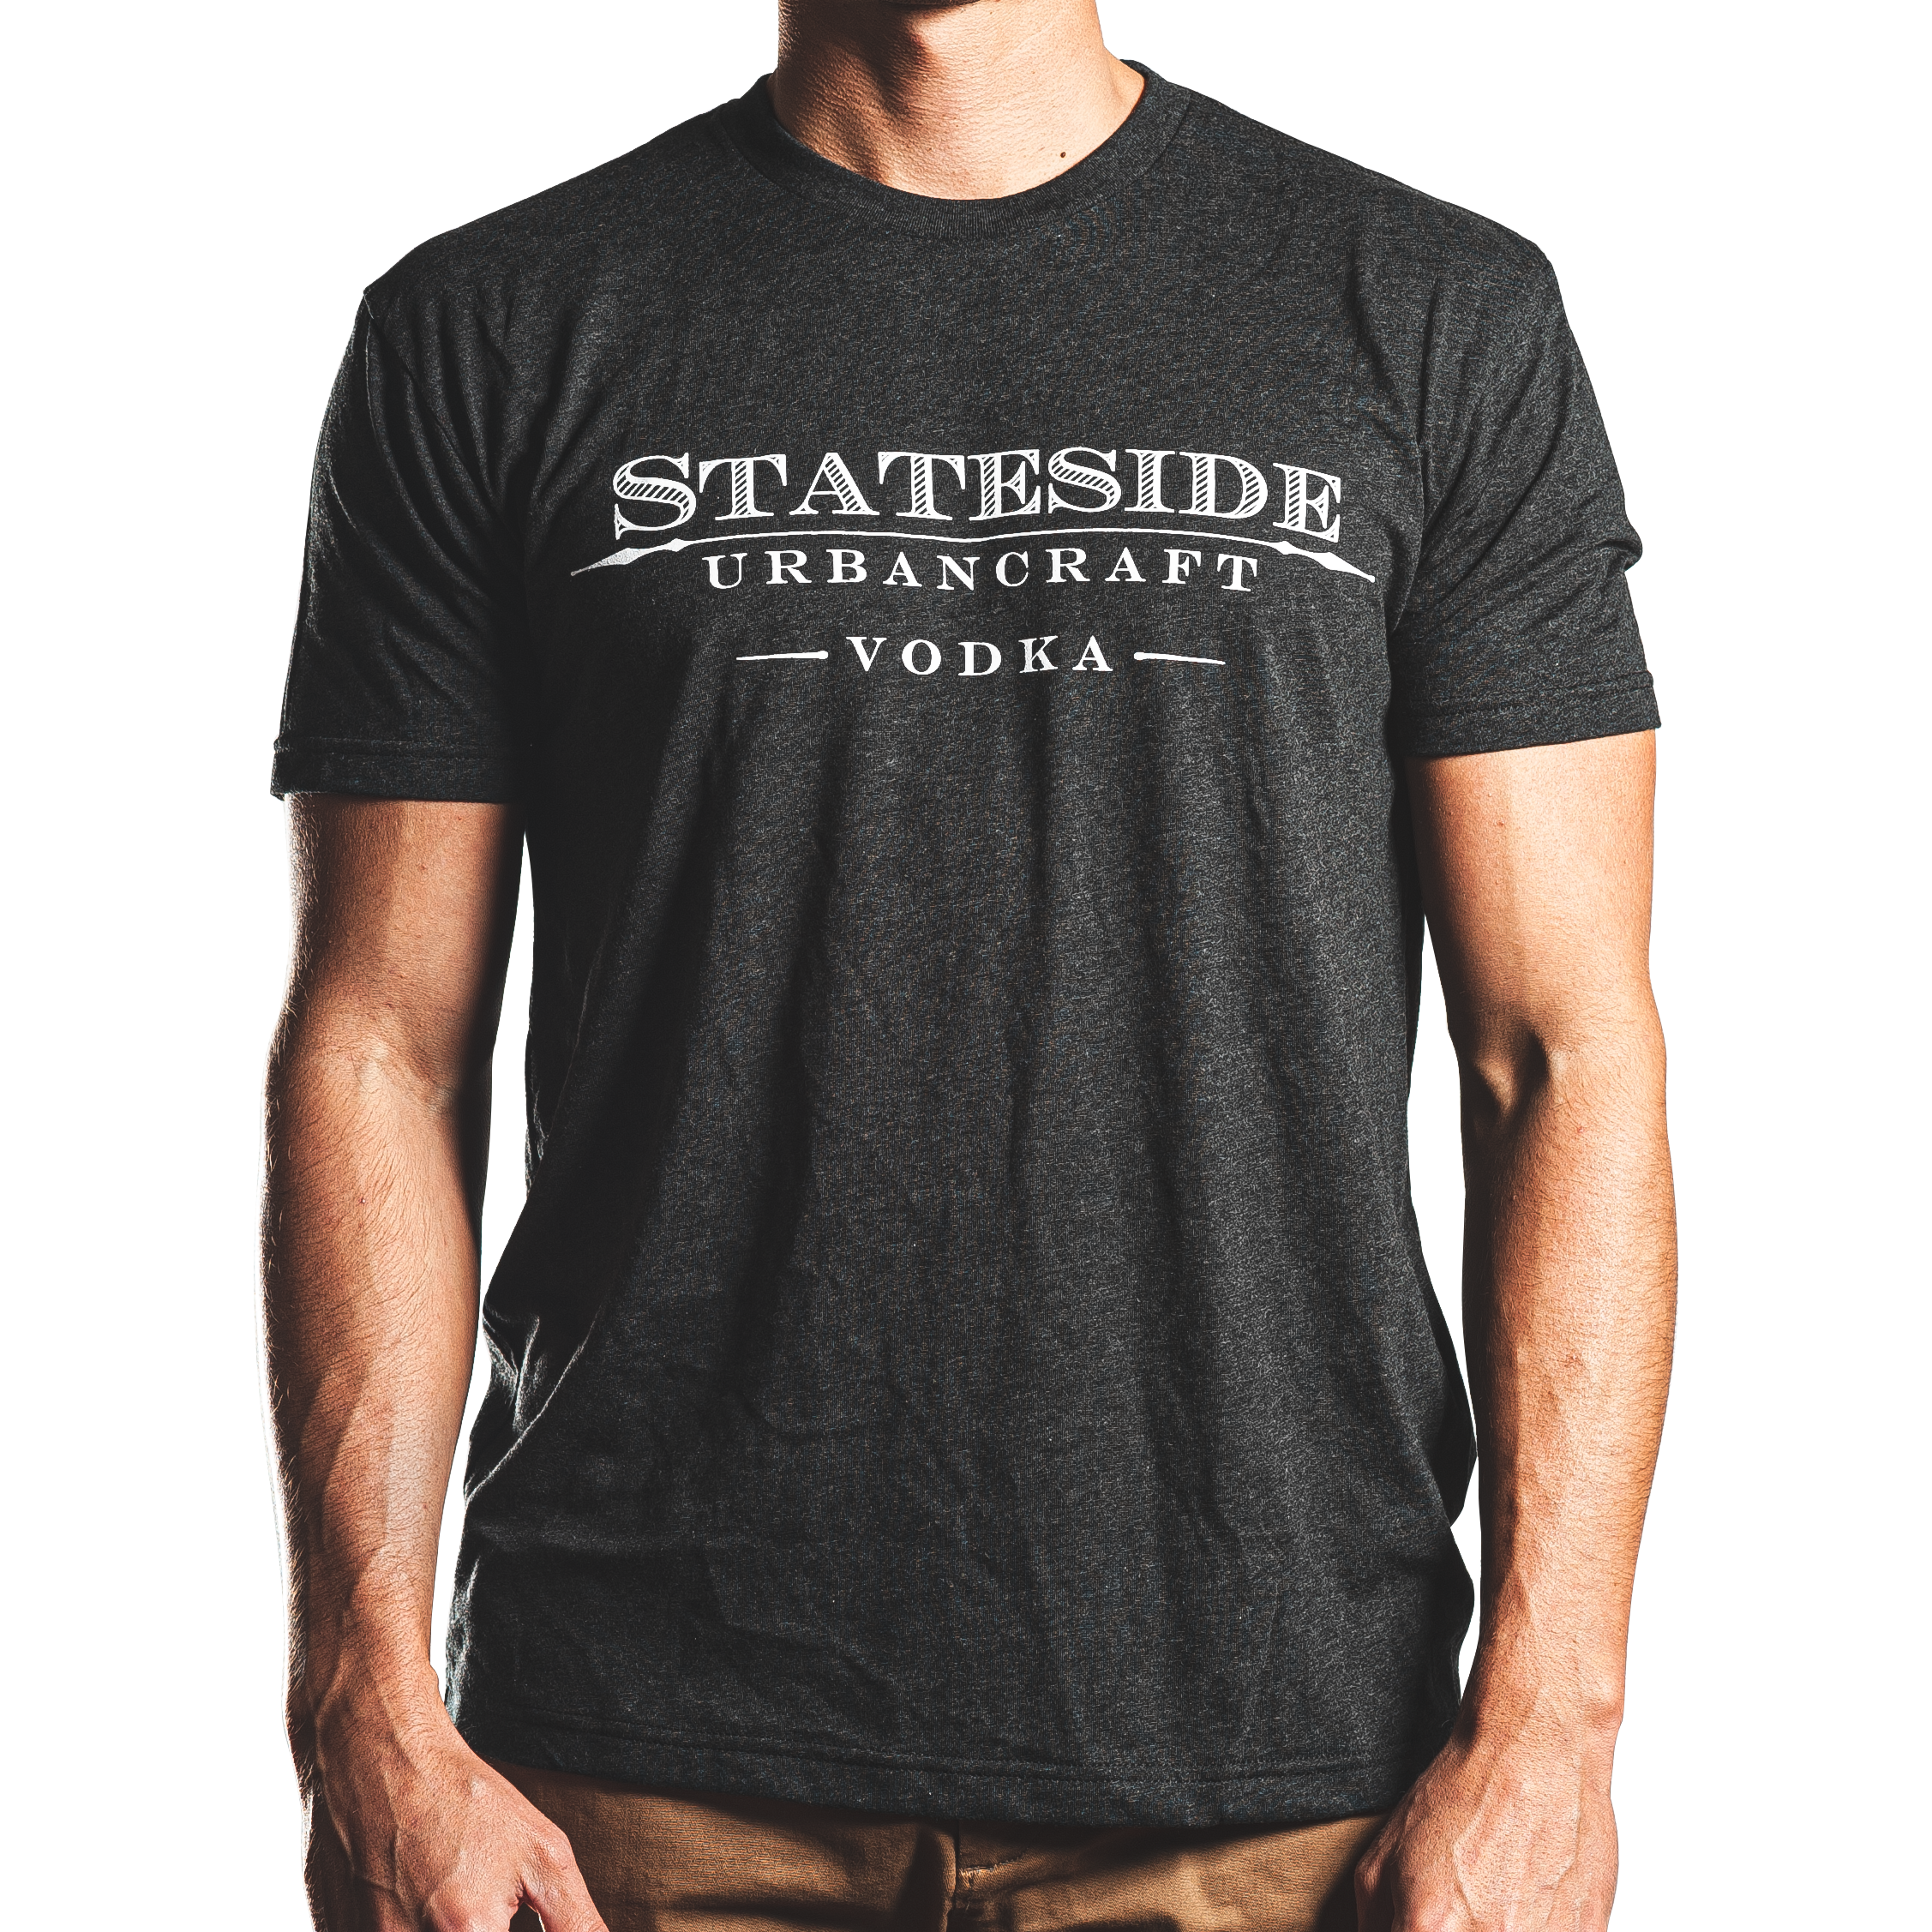 𓆙𝔤𝔬 𝔟𝔦𝔯𝔡𝔰 𝔬𝔲𝔯𝔱 𓆙 on X: 🚨ATTENTION 🚨 @statesidevodka is  offering $25 gift cards in exchang